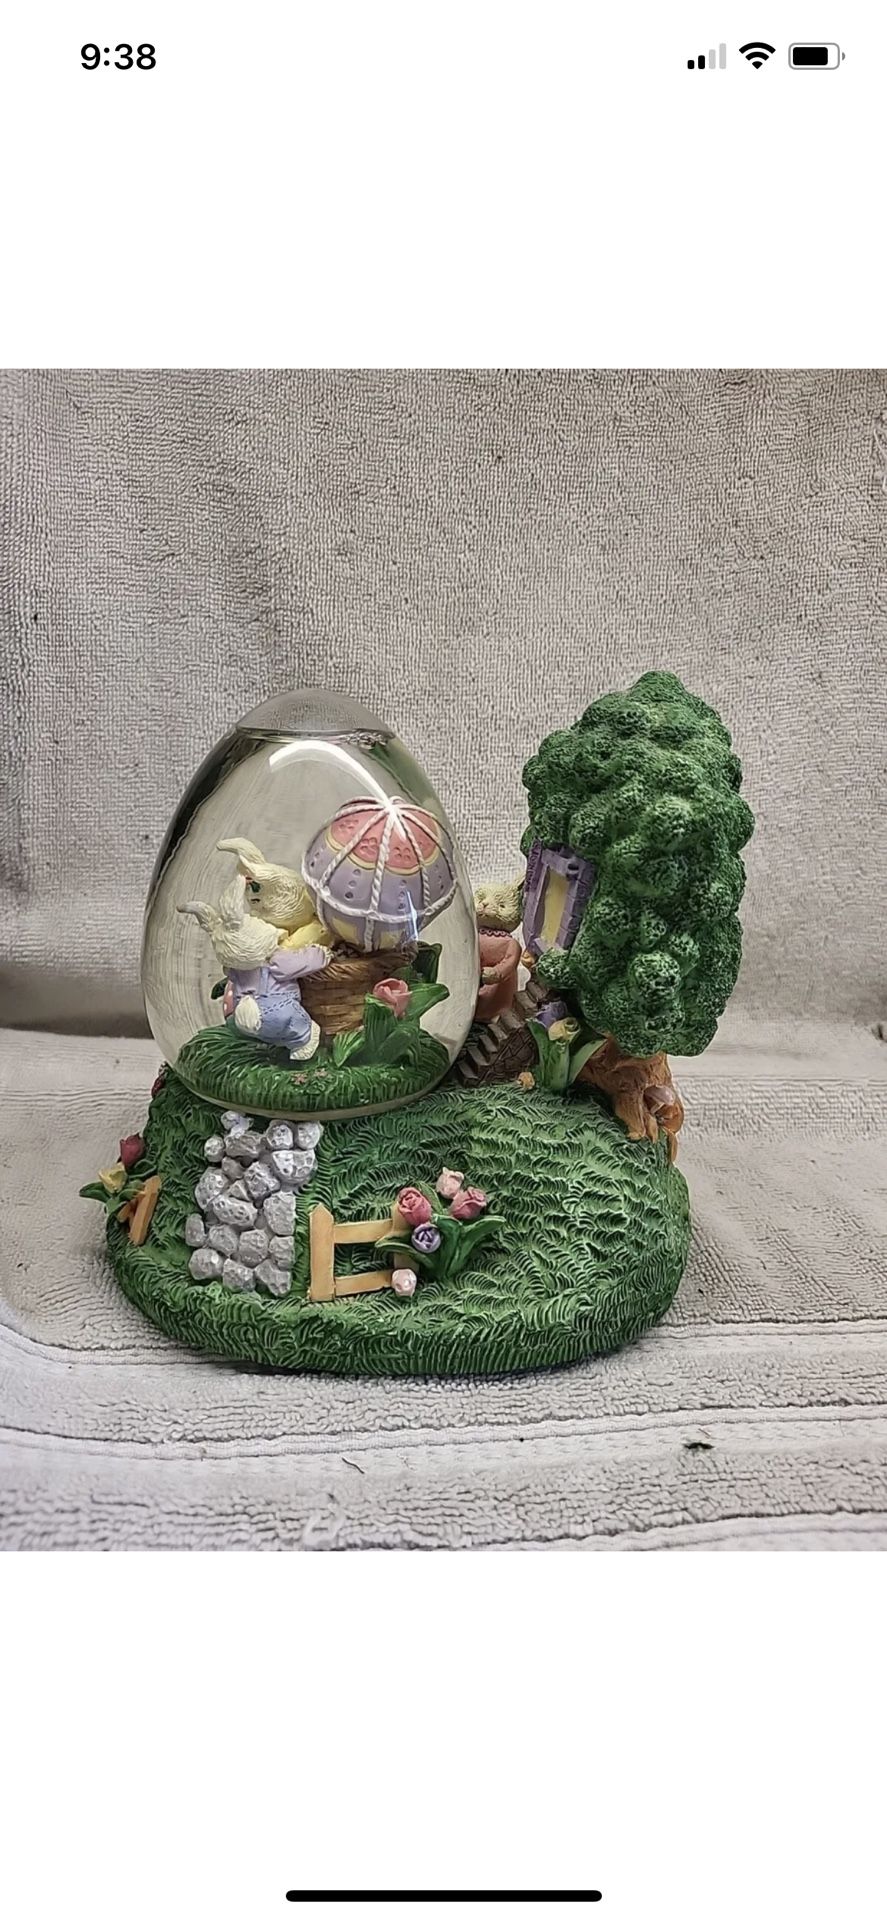 Easter Egg Spring Snow Water Globe Bunny Rabbit “Peter Cottontail” Musical Box